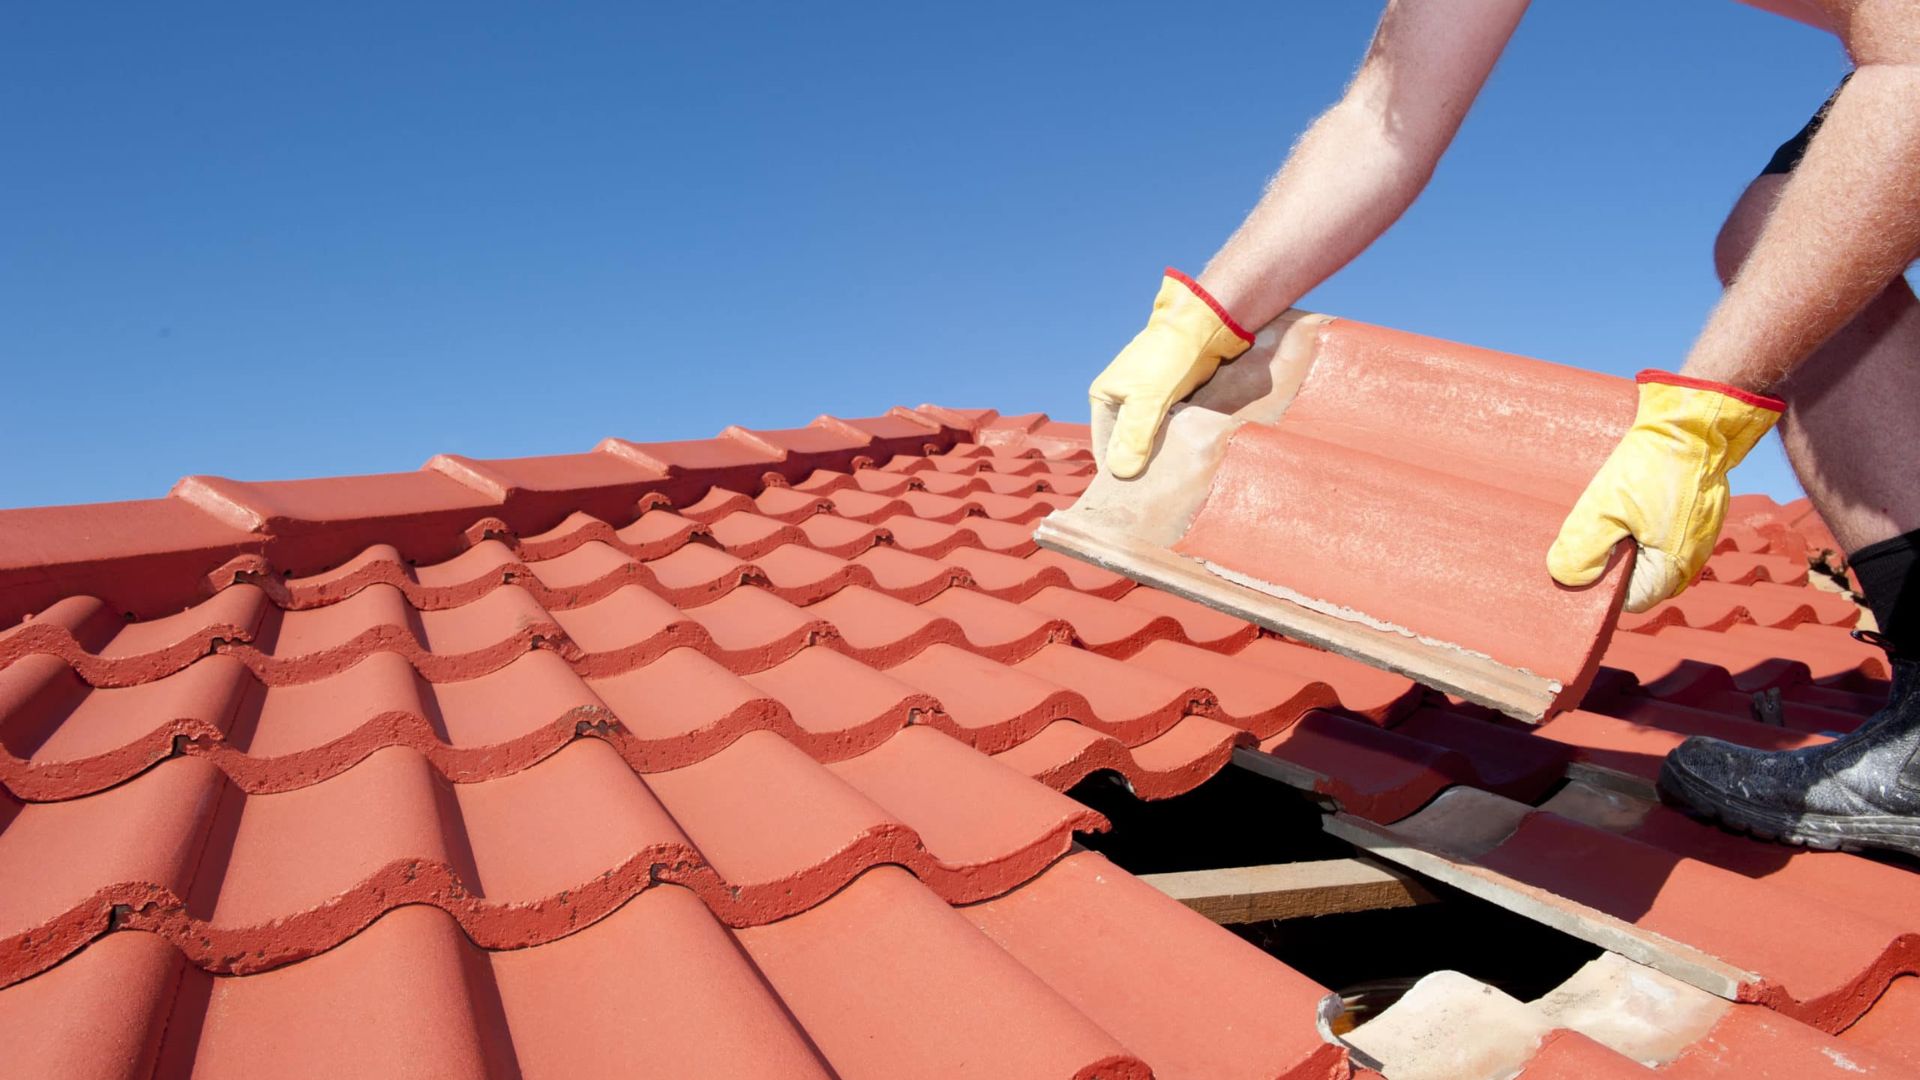  What Are the Long-Term Benefits of Investing in Tile Roofing for Your Business?